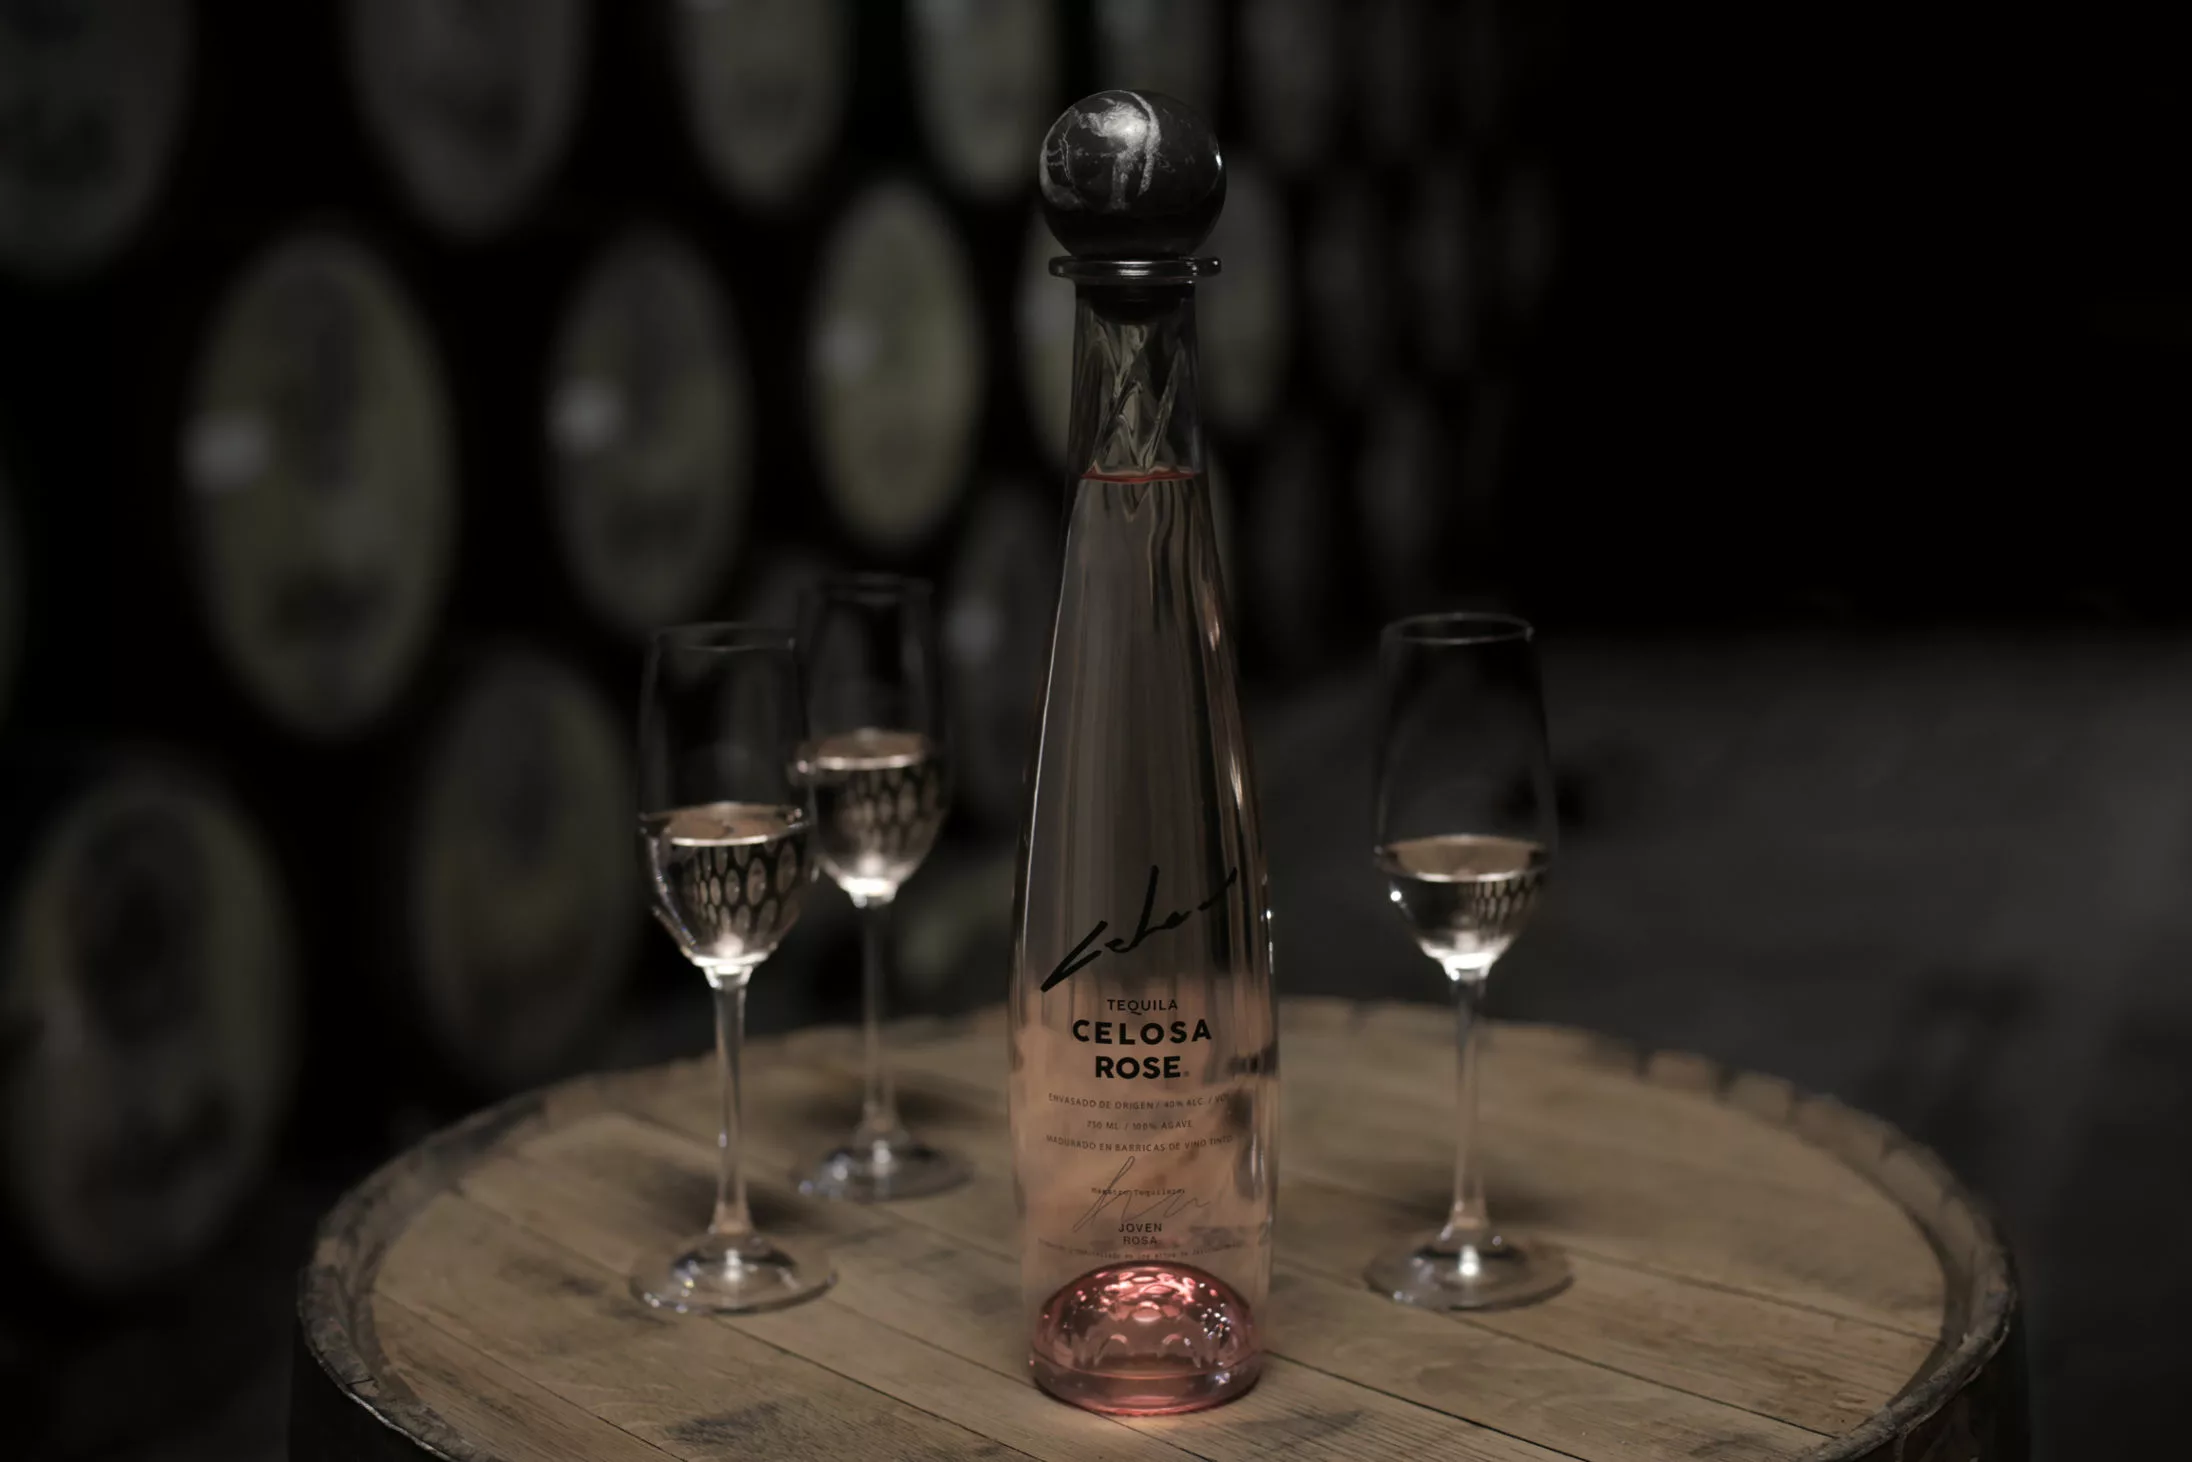 A bottle of Mexican Celosa Rose tequila and three glasses on a wooden barrel, with blurred barrels in the background.